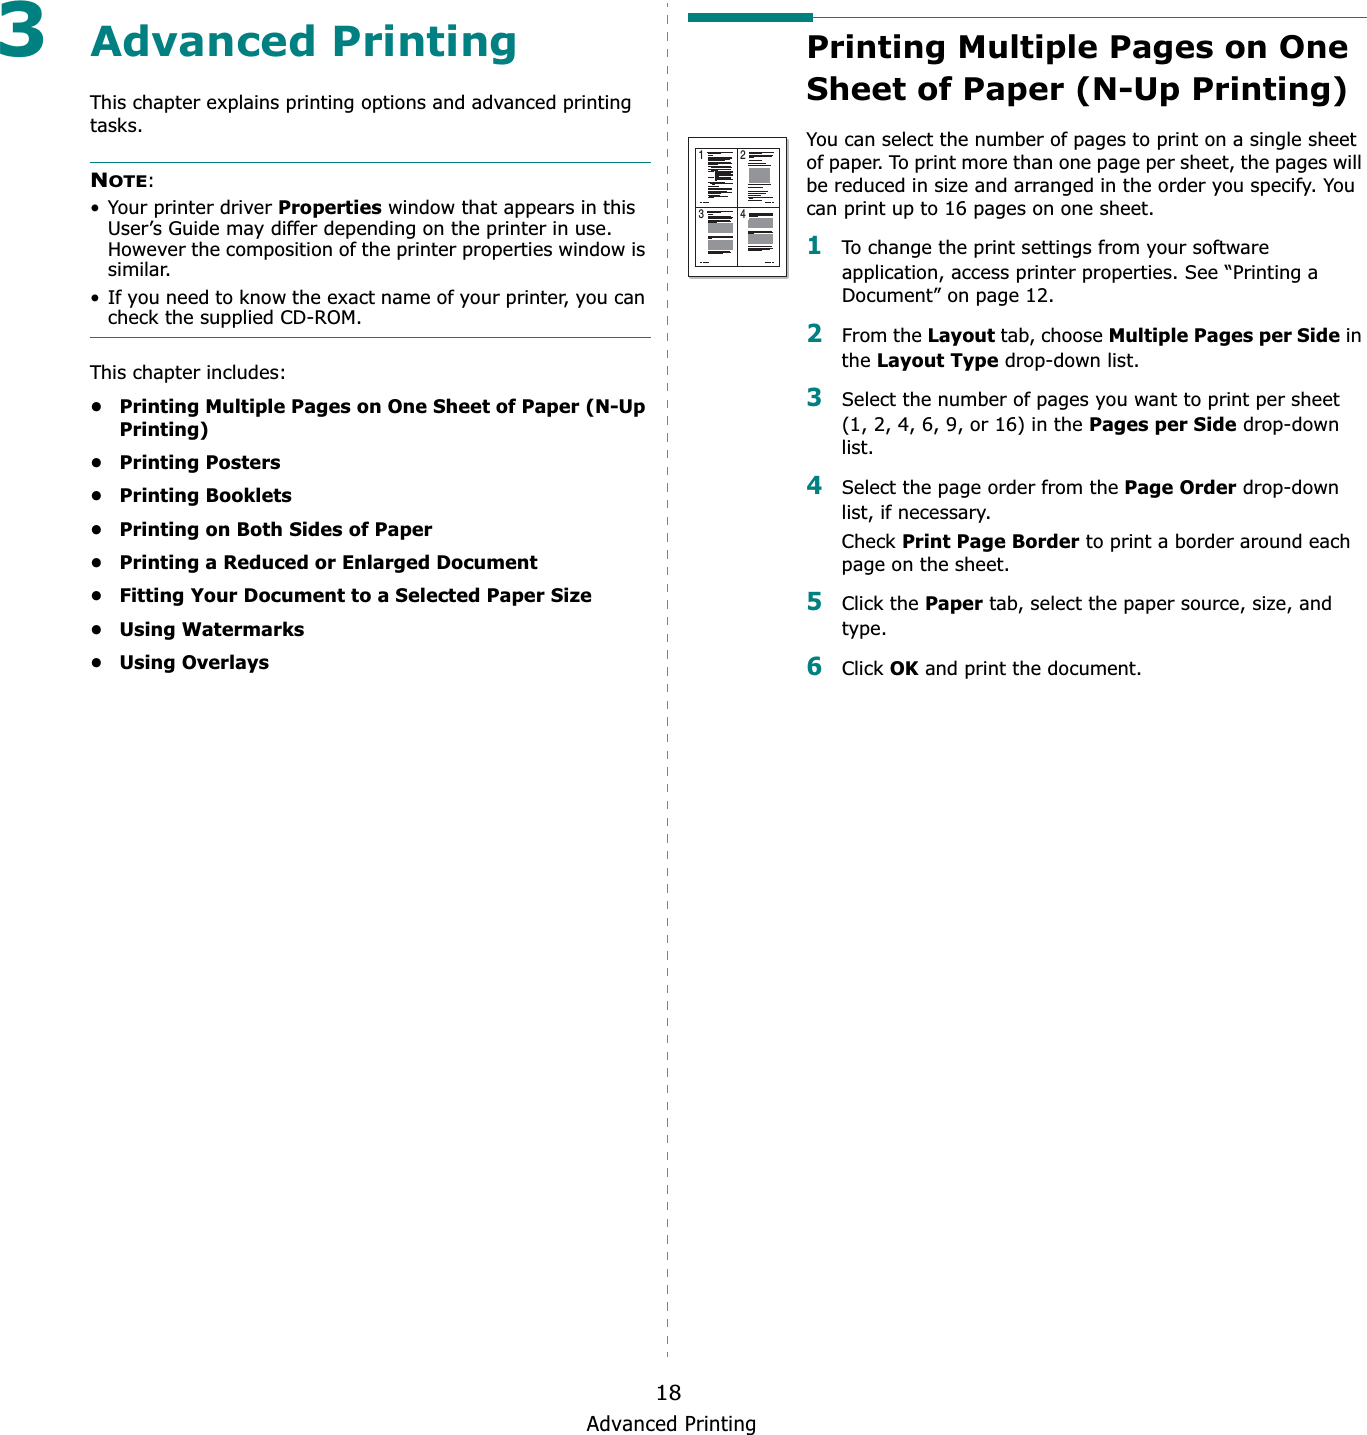 Advanced Printing183Advanced PrintingThis chapter explains printing options and advanced printing tasks. NOTE:• Your printer driver Properties window that appears in this User’s Guide may differ depending on the printer in use. However the composition of the printer properties window is similar.• If you need to know the exact name of your printer, you can check the supplied CD-ROM.This chapter includes:• Printing Multiple Pages on One Sheet of Paper (N-Up Printing)•Printing Posters•Printing Booklets• Printing on Both Sides of Paper• Printing a Reduced or Enlarged Document• Fitting Your Document to a Selected Paper Size• Using Watermarks• Using OverlaysPrinting Multiple Pages on One Sheet of Paper (N-Up Printing) You can select the number of pages to print on a single sheet of paper. To print more than one page per sheet, the pages will be reduced in size and arranged in the order you specify. You can print up to 16 pages on one sheet.  1To change the print settings from your software application, access printer properties. See “Printing a Document” on page 12.2From the Layout tab, choose Multiple Pages per Side in the Layout Type drop-down list. 3Select the number of pages you want to print per sheet (1, 2, 4, 6, 9, or 16) in the Pages per Side drop-down list.4Select the page order from the Page Order drop-down list, if necessary.Check Print Page Border to print a border around each page on the sheet. 5Click the Paper tab, select the paper source, size, and type.6Click OK and print the document. 1 23 4